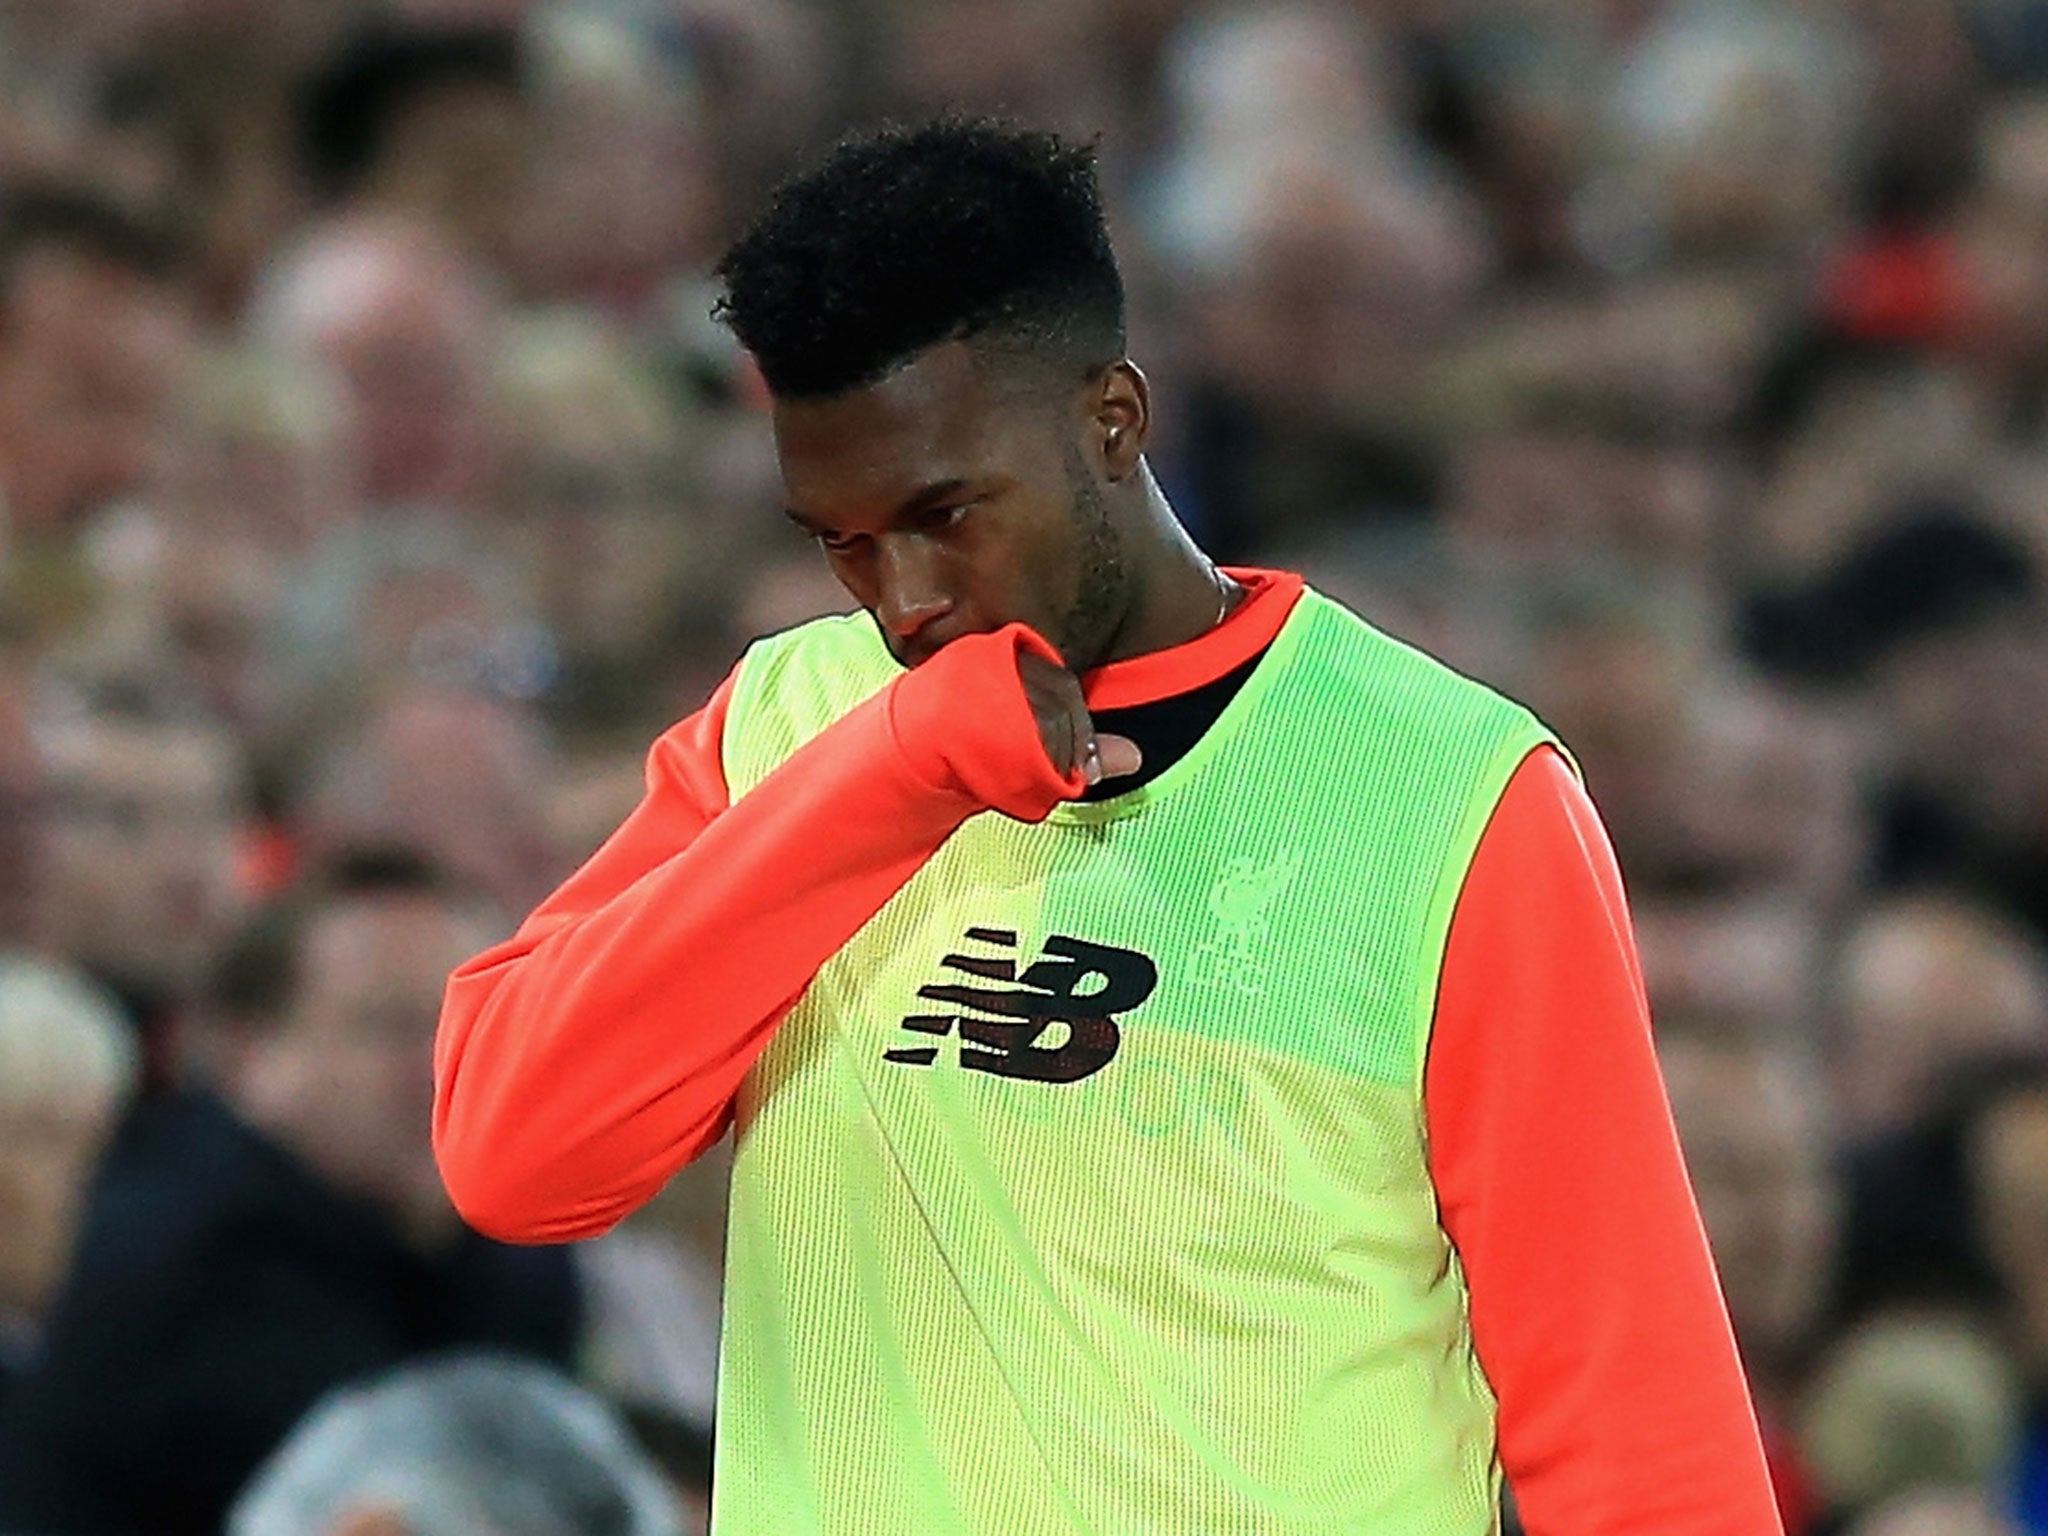 Sturridge could be on his way out this coming January